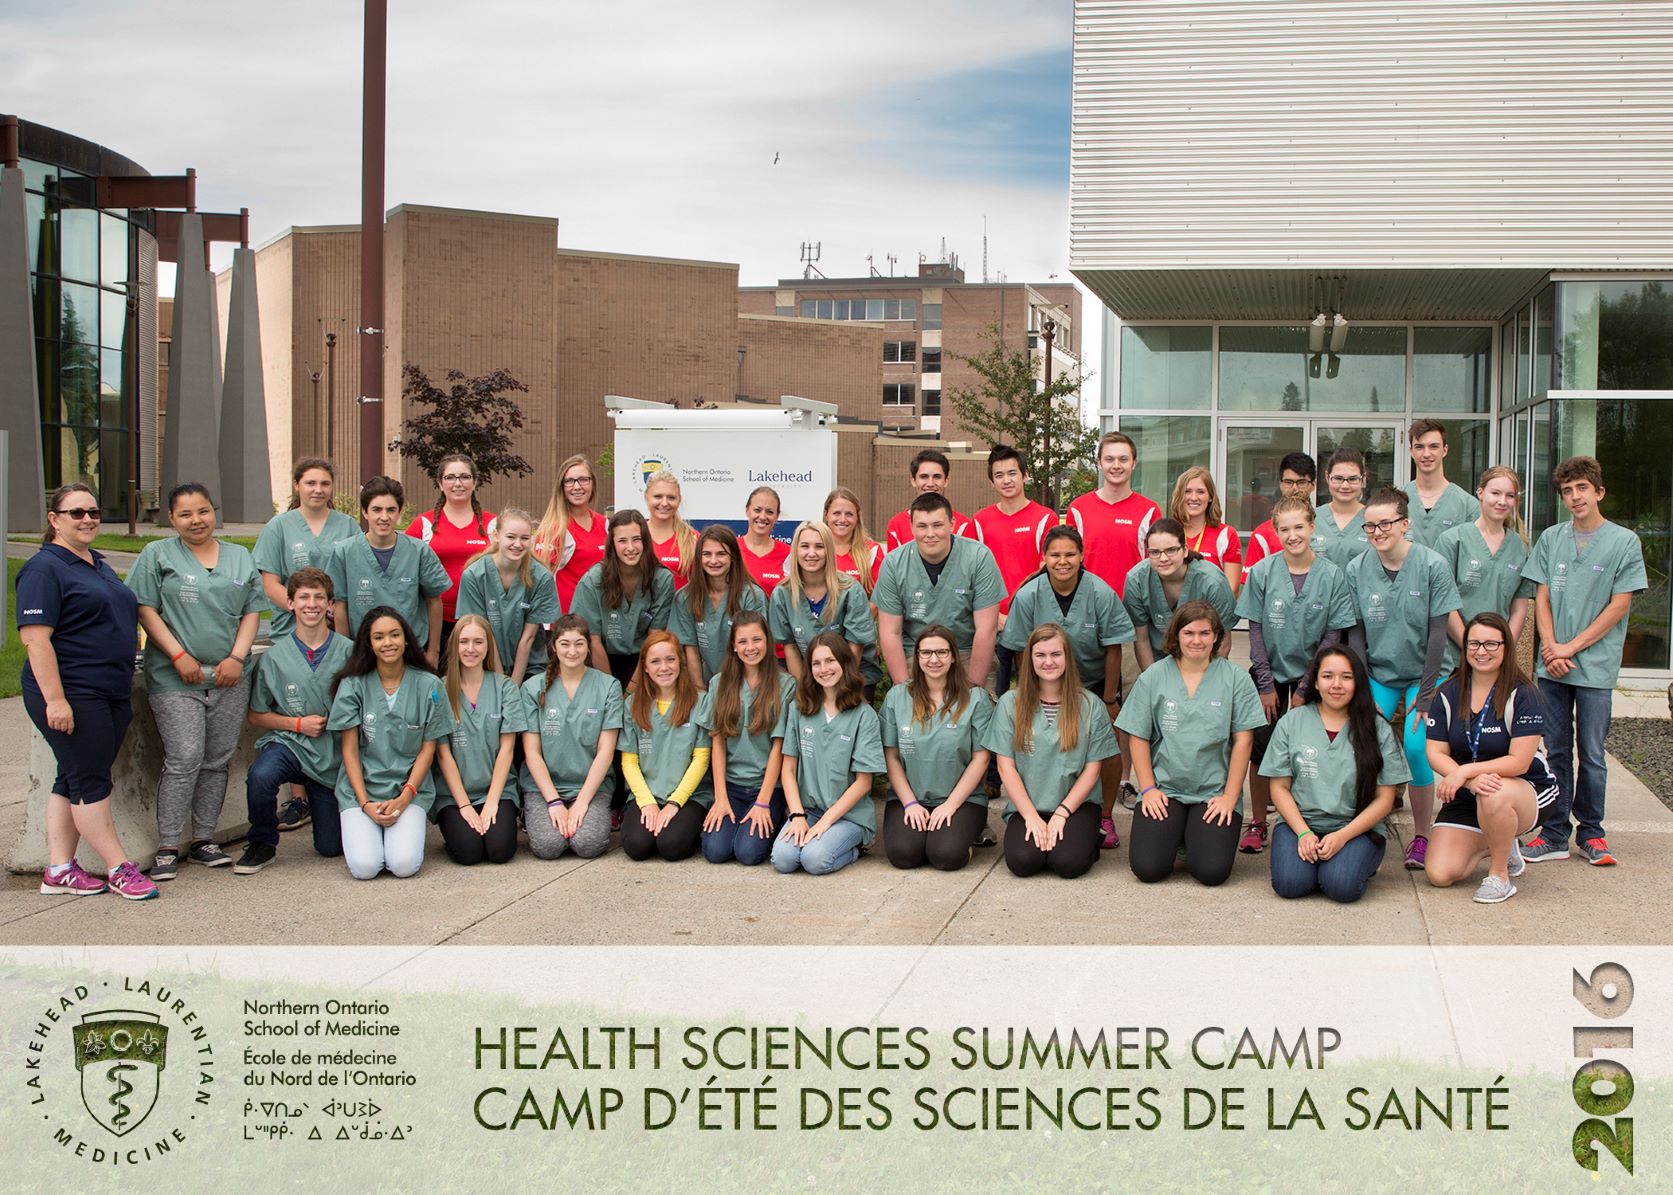 Health Sciences Summer Camp 2016 group photo of campers, team leads, and NOSM staff